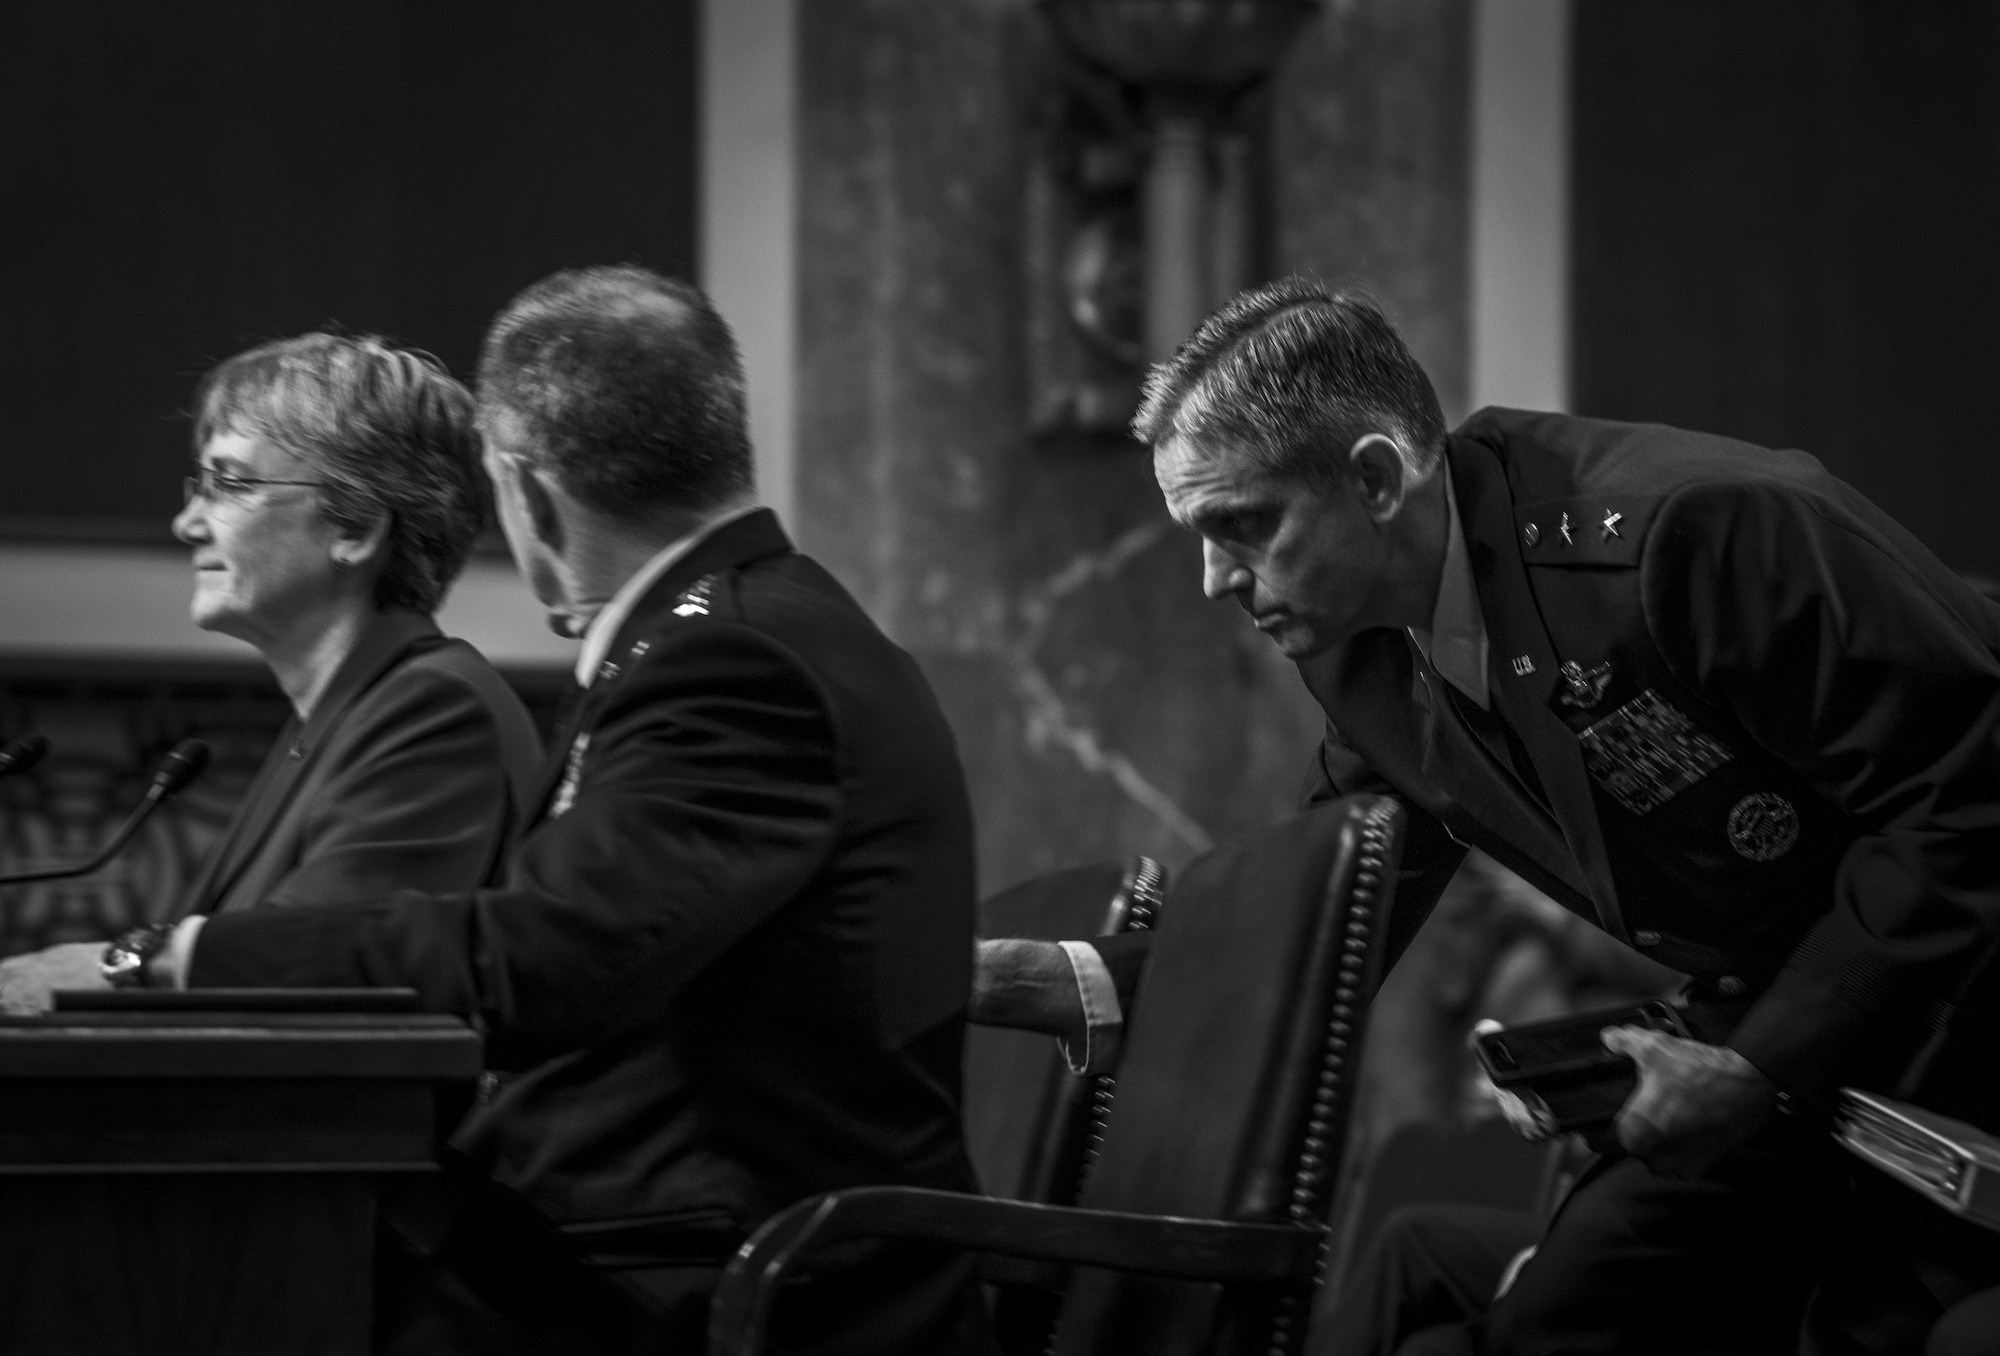 Maj. Gen. Steven Basham, director of the Secretary of the Air Force Legislative Liaison Office, hands a note to Gen. David Goldfein, U.S. Air Force chief of staff, during a posture hearing before the Senate Armed Services Committee at Dirksen Senate Office Building in Washington, D.C., April 4, 2019. (U.S. Air Force photo by Staff Sgt. Marianique Santos)